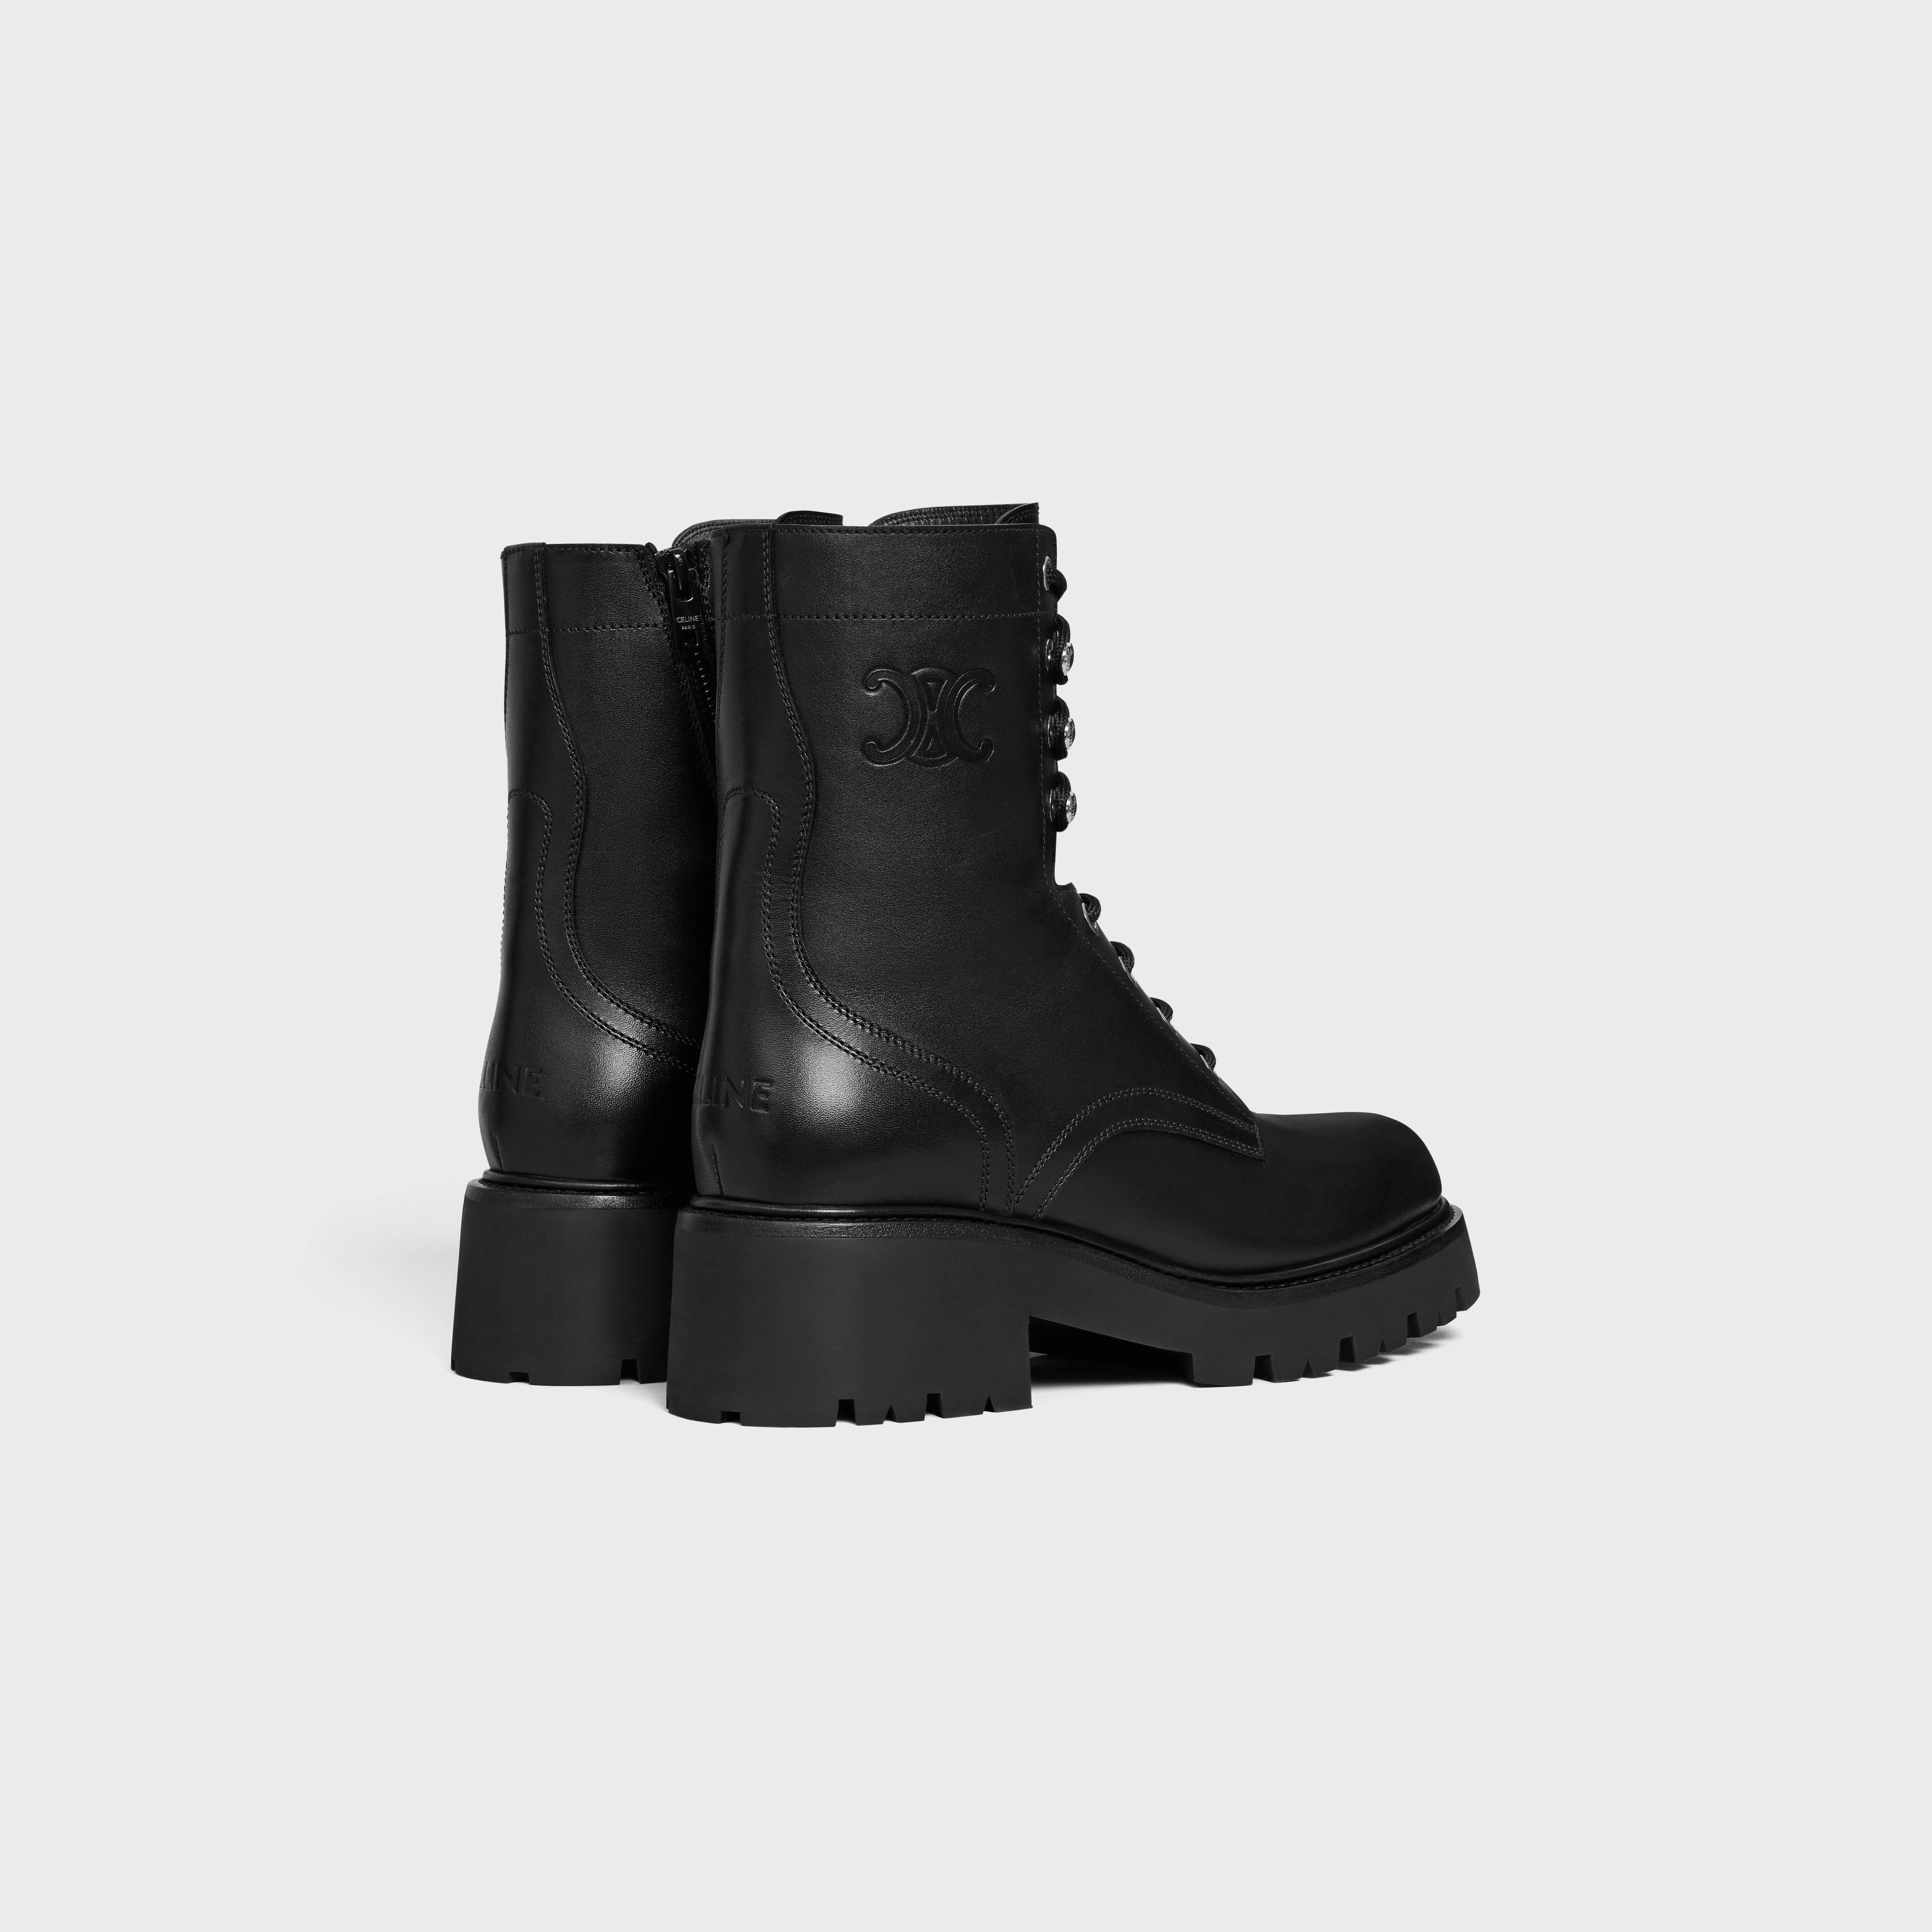 CELINE TRIOMPHE RANGERS MID LACE-UP BOOT in SHINY BULLSKIN - 3